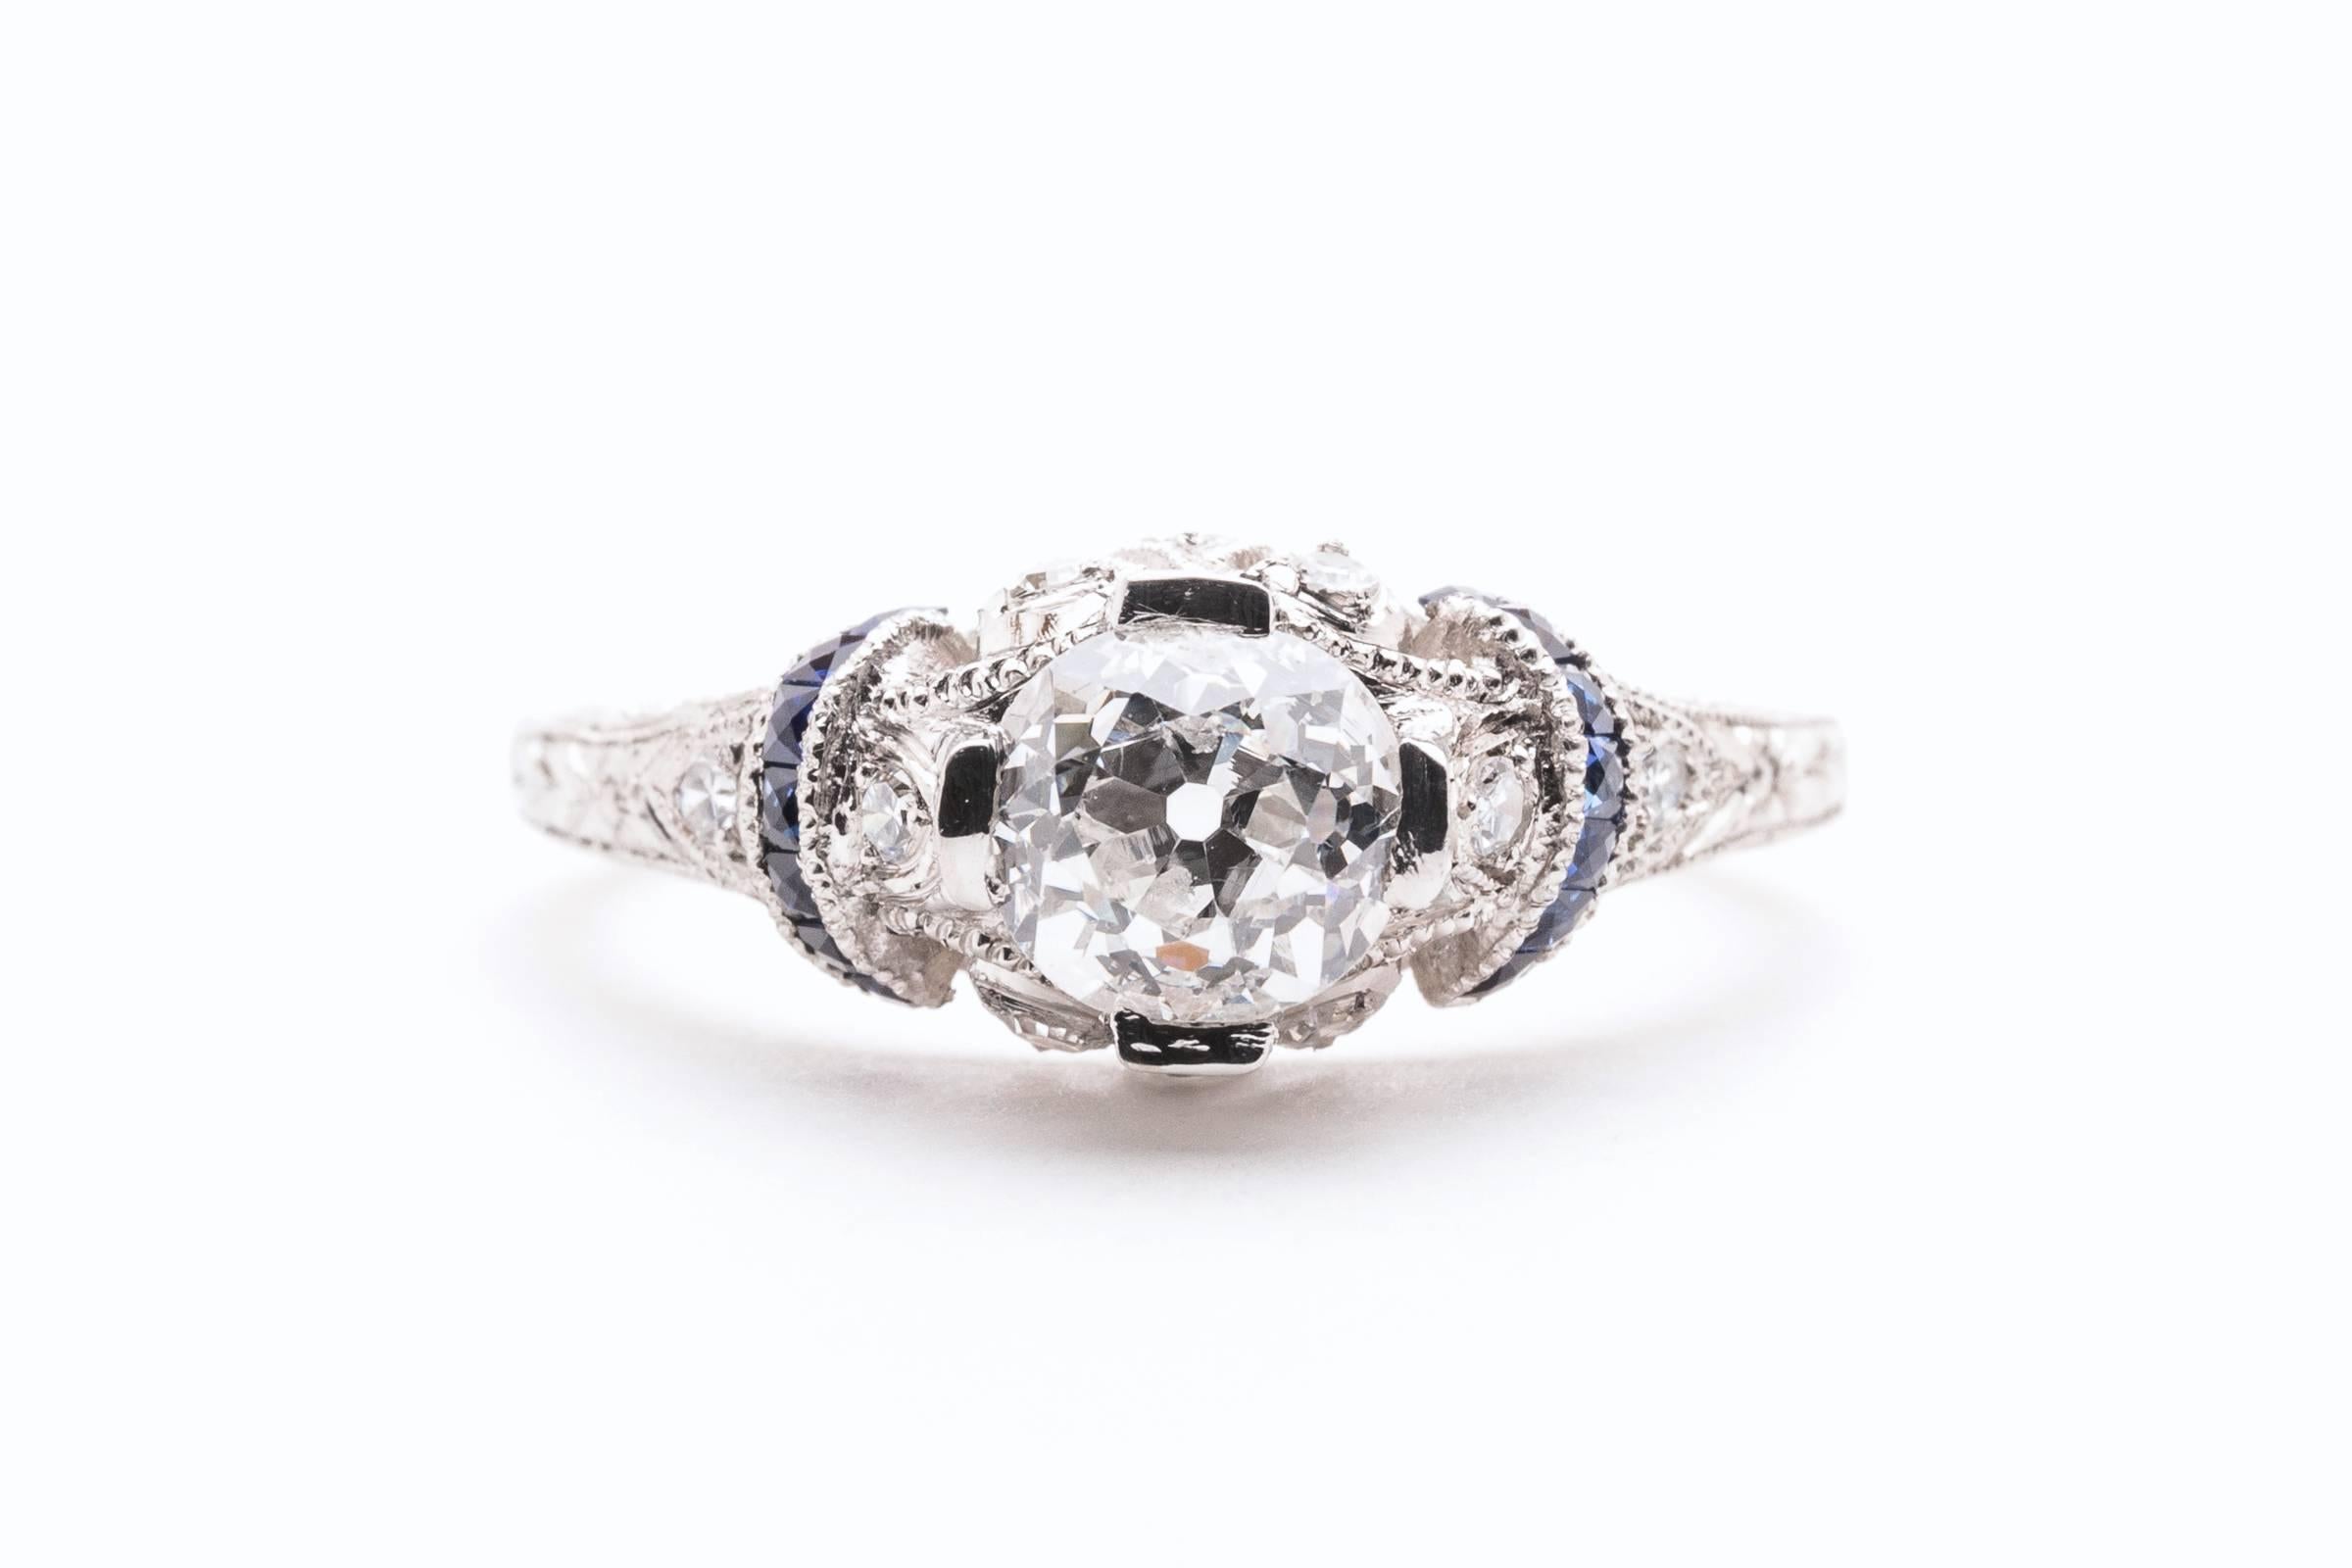 
Beacon Hill Jewelers Presents:

A beautiful art deco period hand crafted diamond engagement ring in luxurious platinum. Centered by a sparkling old mine cut diamond, this ring features fantastic hand engraving throughout complemented by hand